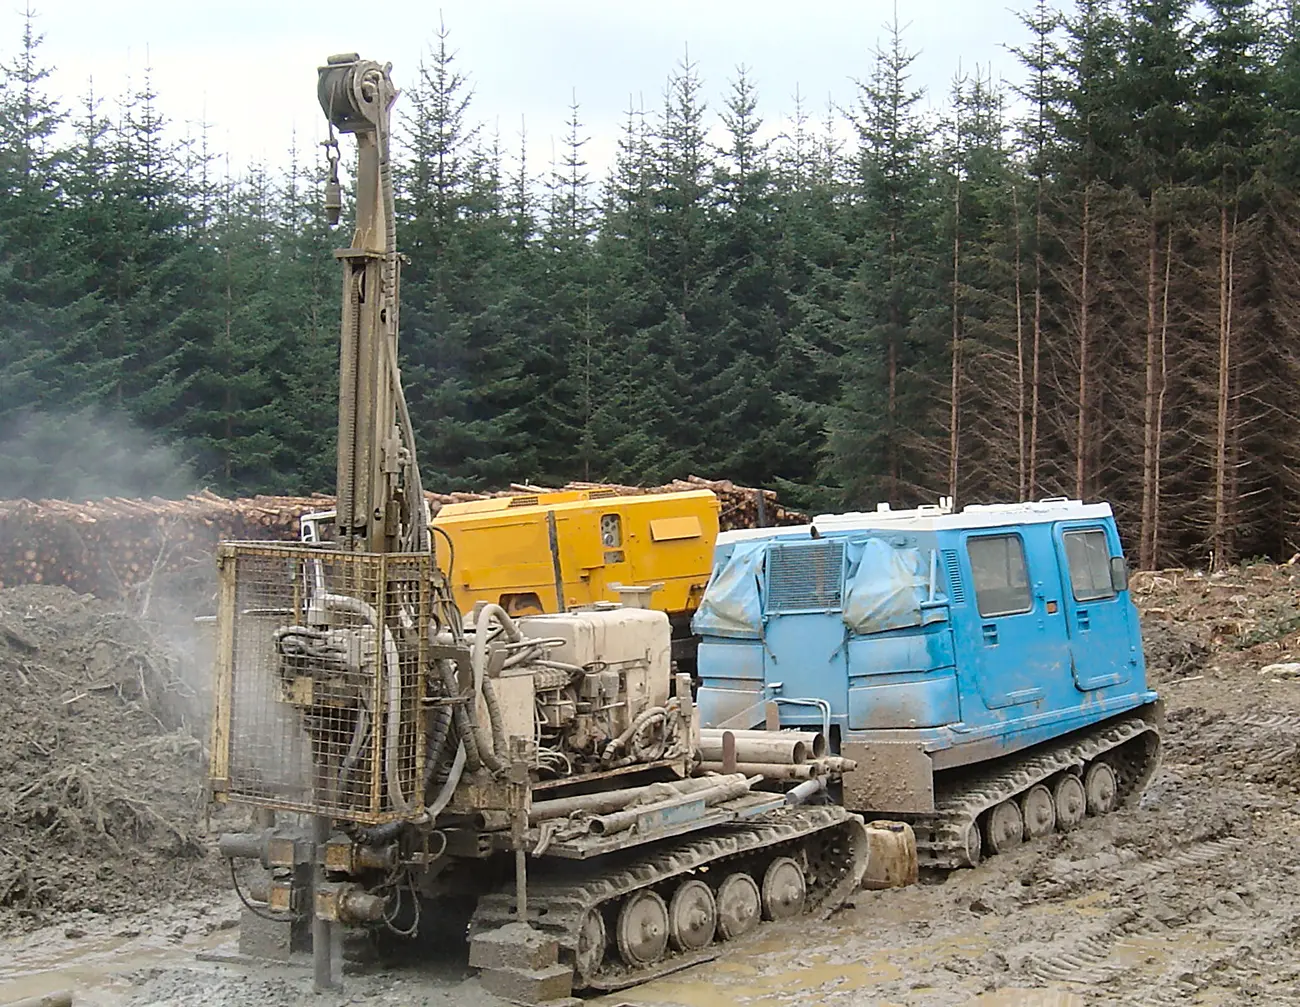 rotary borehole drill at work in woodland